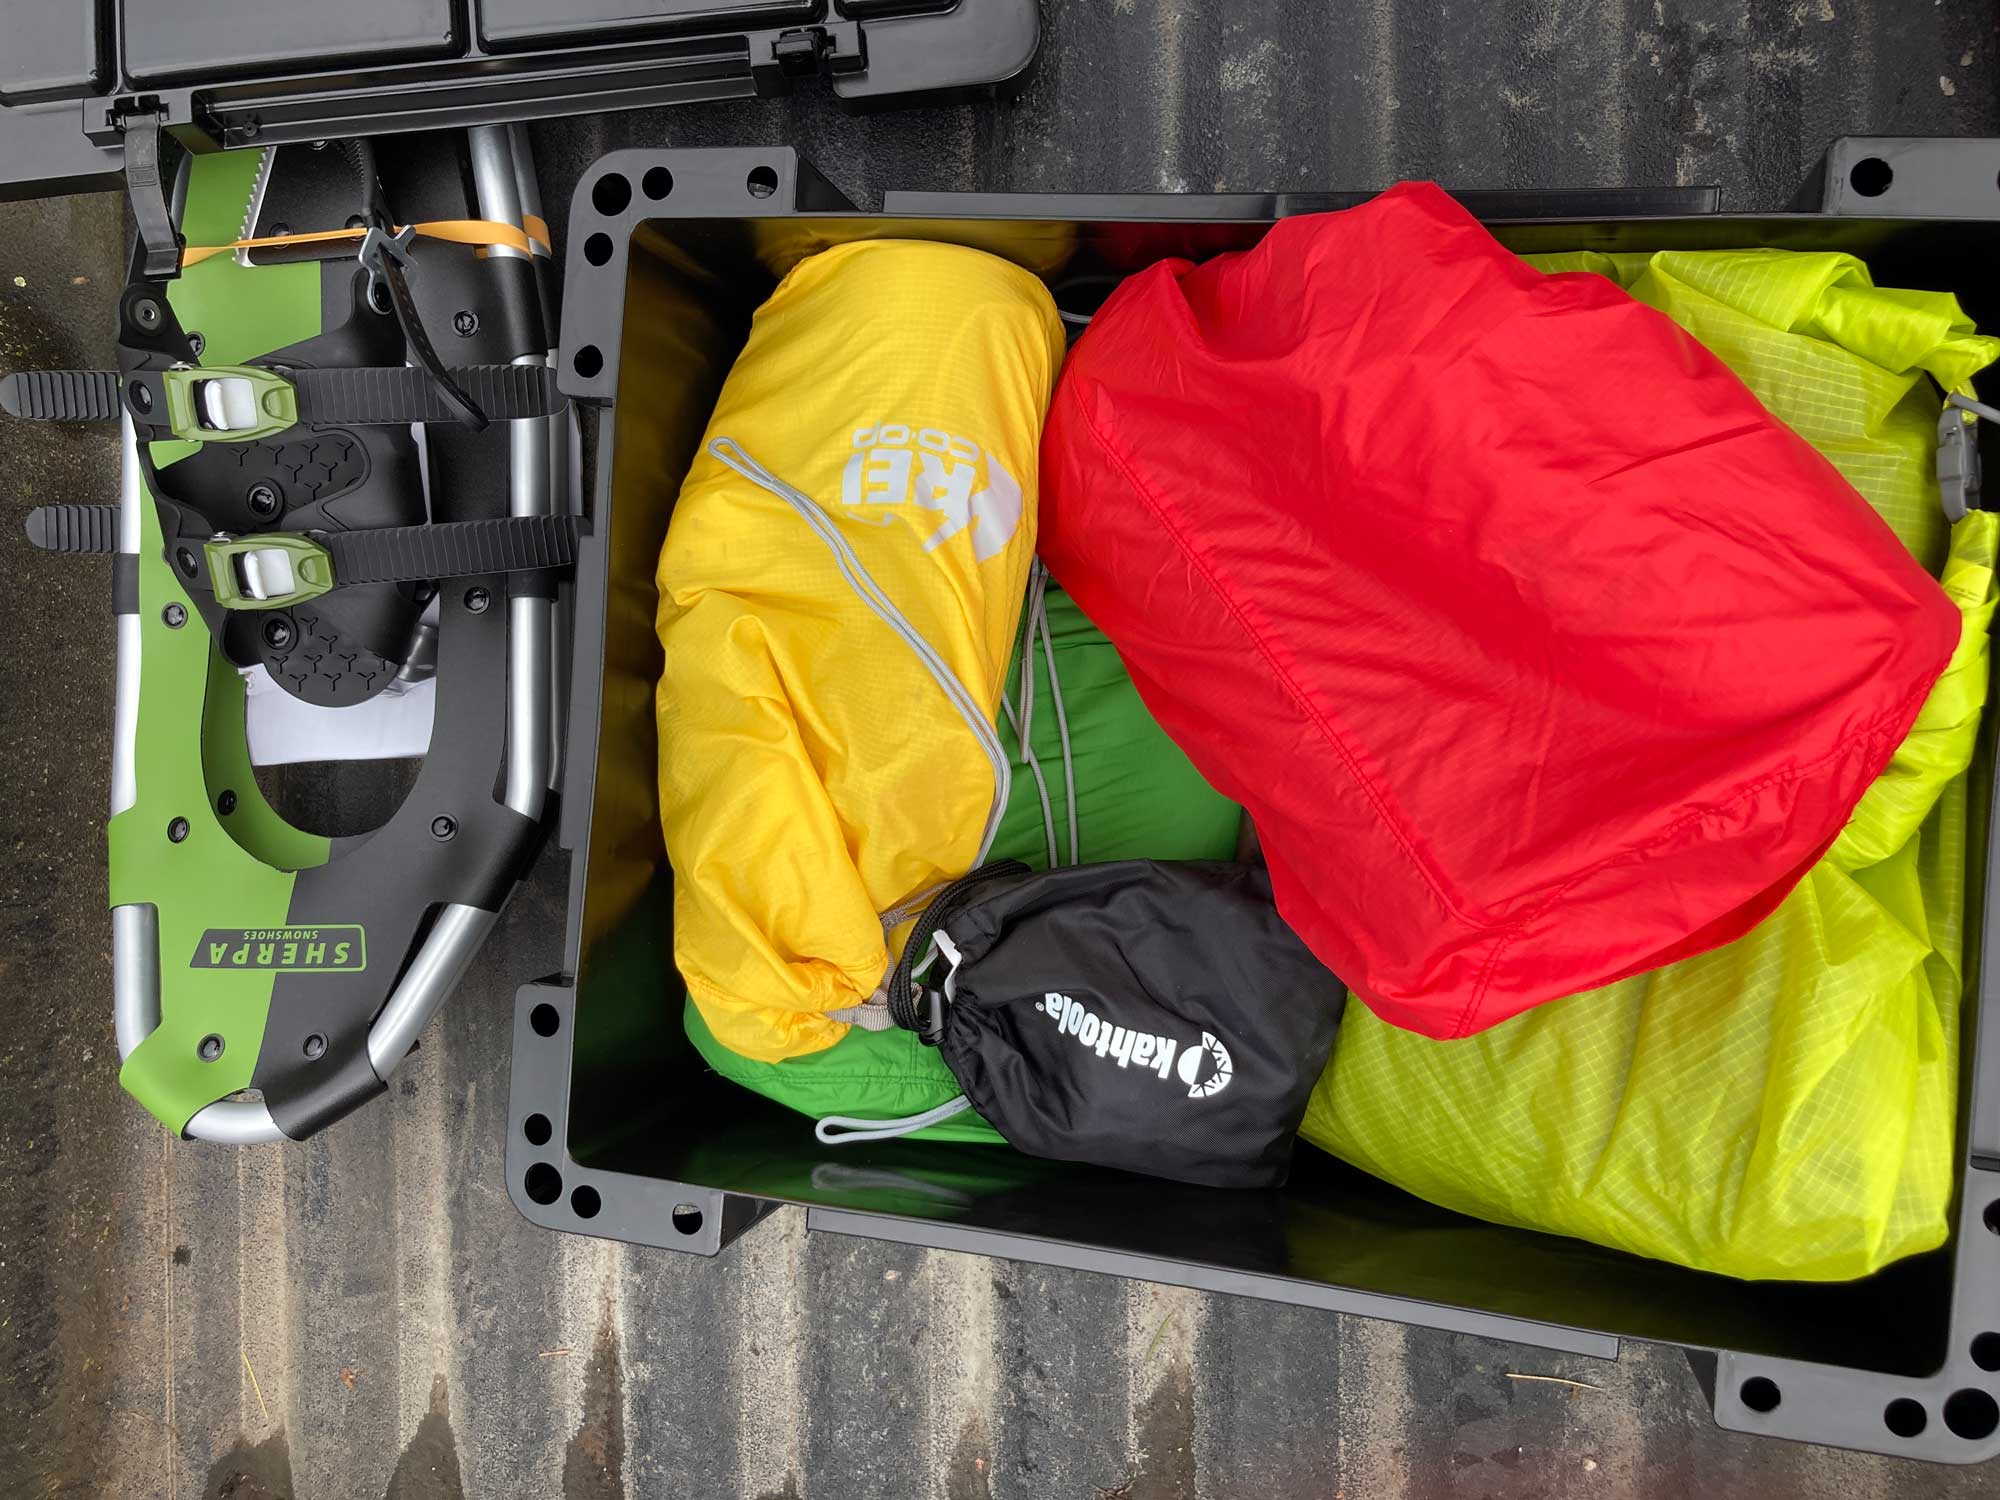 Snowshoes at left in a truck bed, with a black box full of kit bags in green, red, yellow, and black